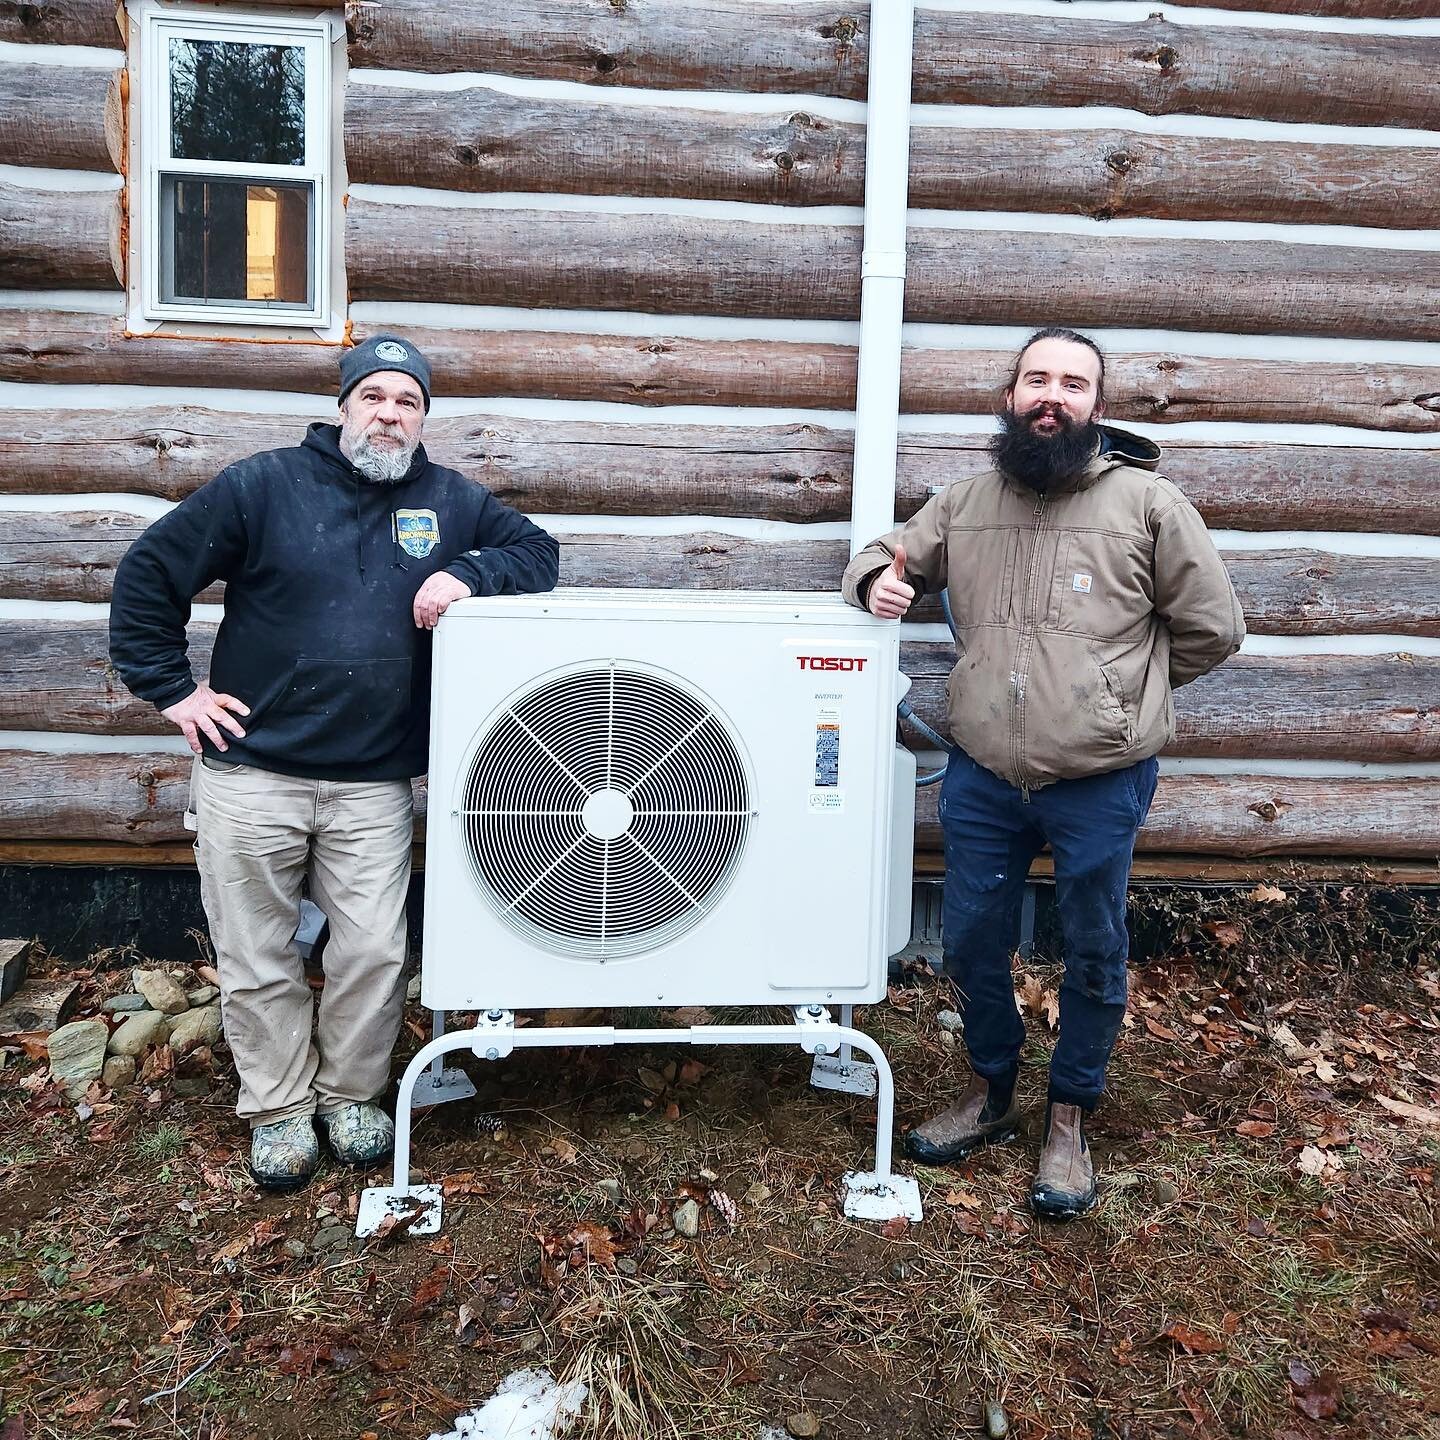 A 24K Ceiling Cassette Install in a custom Log Cabin built from trees harvested on the land!! What an amazing space a heating system setup (check out the giant heat sink stove!) #efficiency #heat #woodstove #heatpump #nh #vt #sevca #efficiencyvt #eco